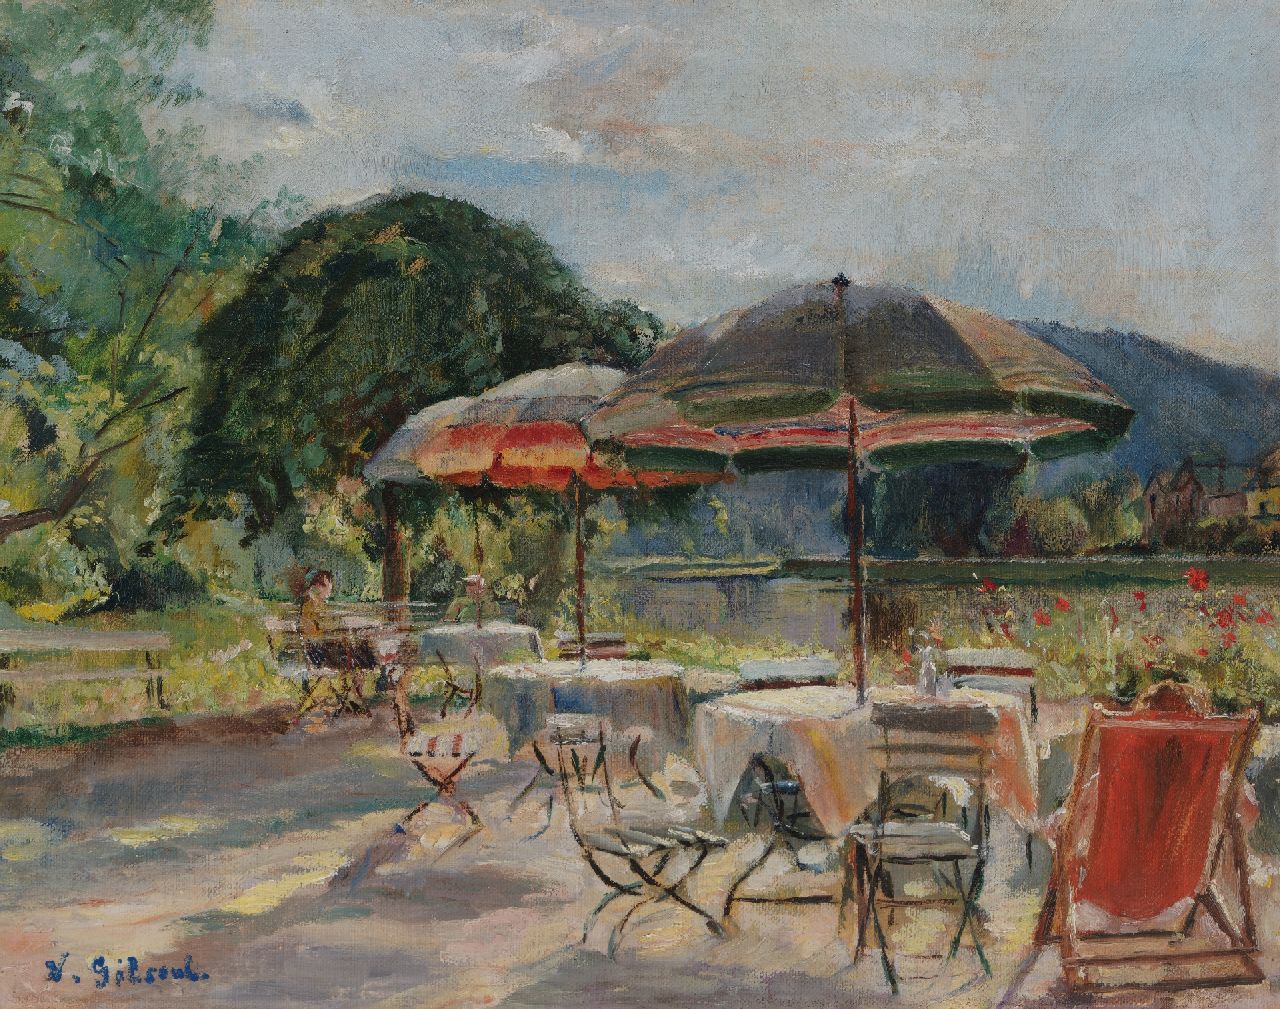 Gilsoul V.O.  | 'Victor' Olivier Gilsoul | Paintings offered for sale | Terrace on the water, oil on canvas 32.1 x 40.1 cm, signed l.l. and without frame